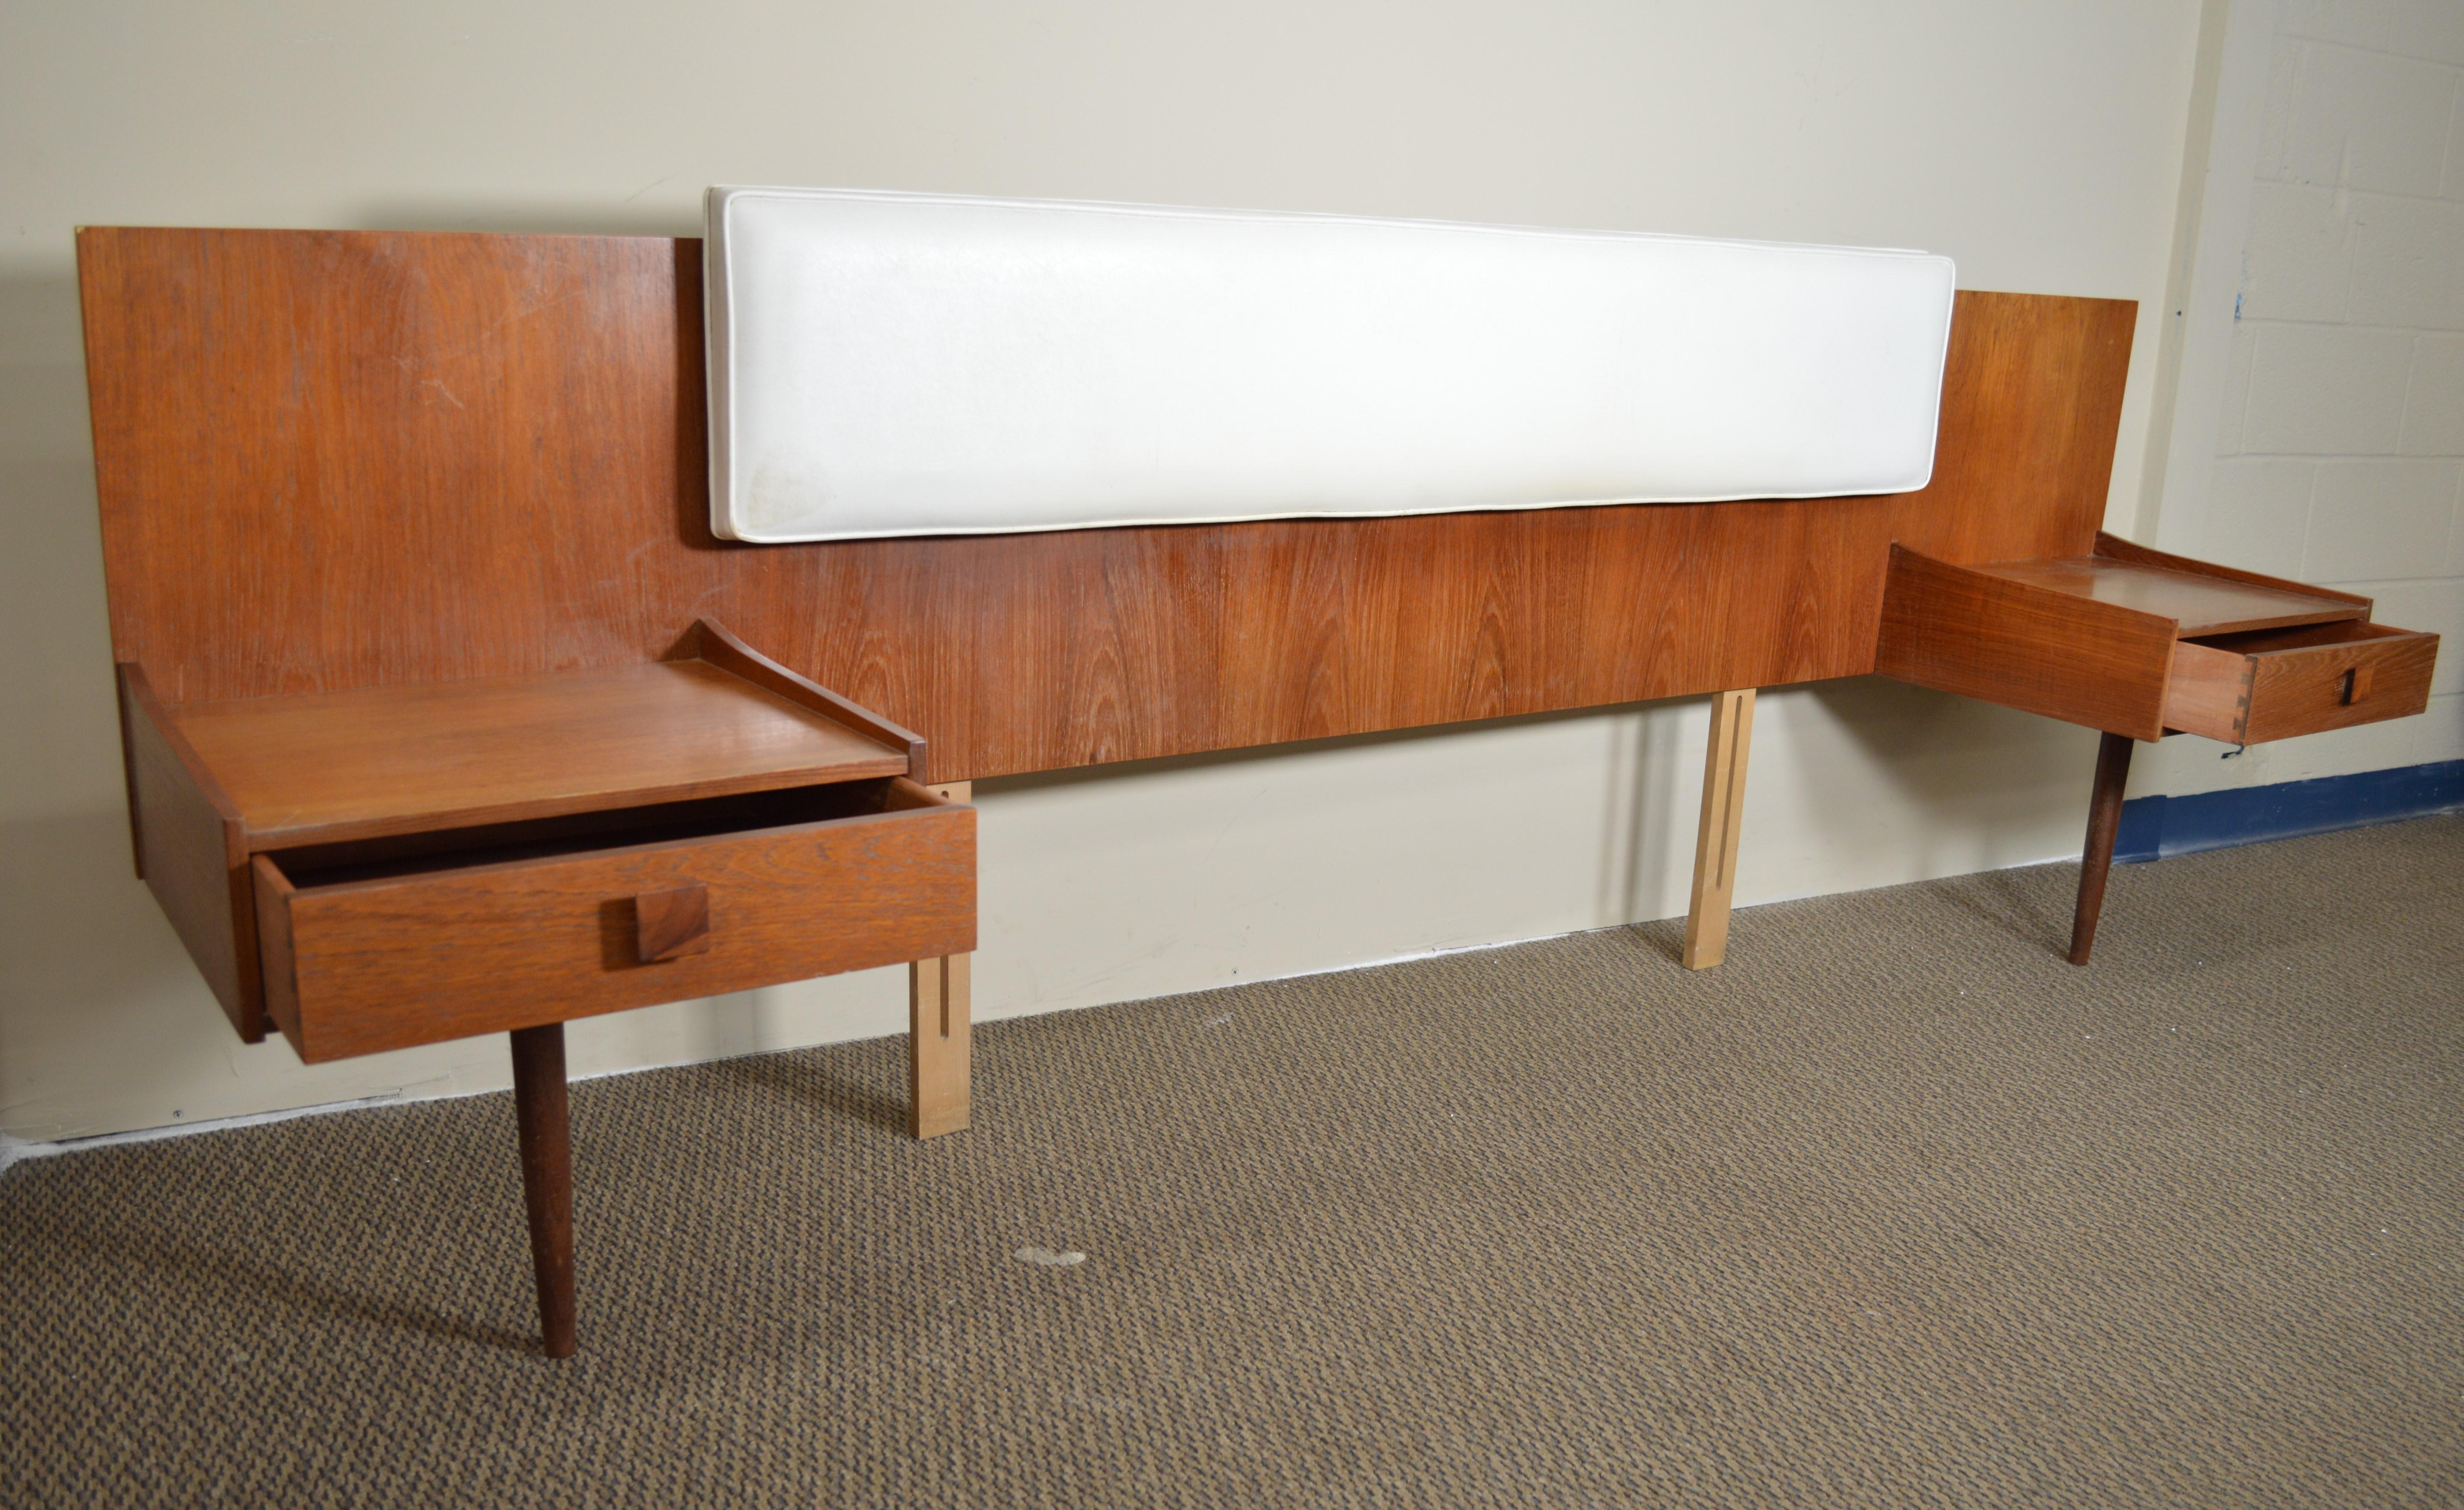 Fantastic queen size headboard. Designed by Kofod Larsen for G Plan. Signed in the drawers. Teak veneer.

Featuring 2 floating nightstands with a drawer. Rosewood square handles. Adjustable white vinyl head rest. Head rest can be tilted as shown